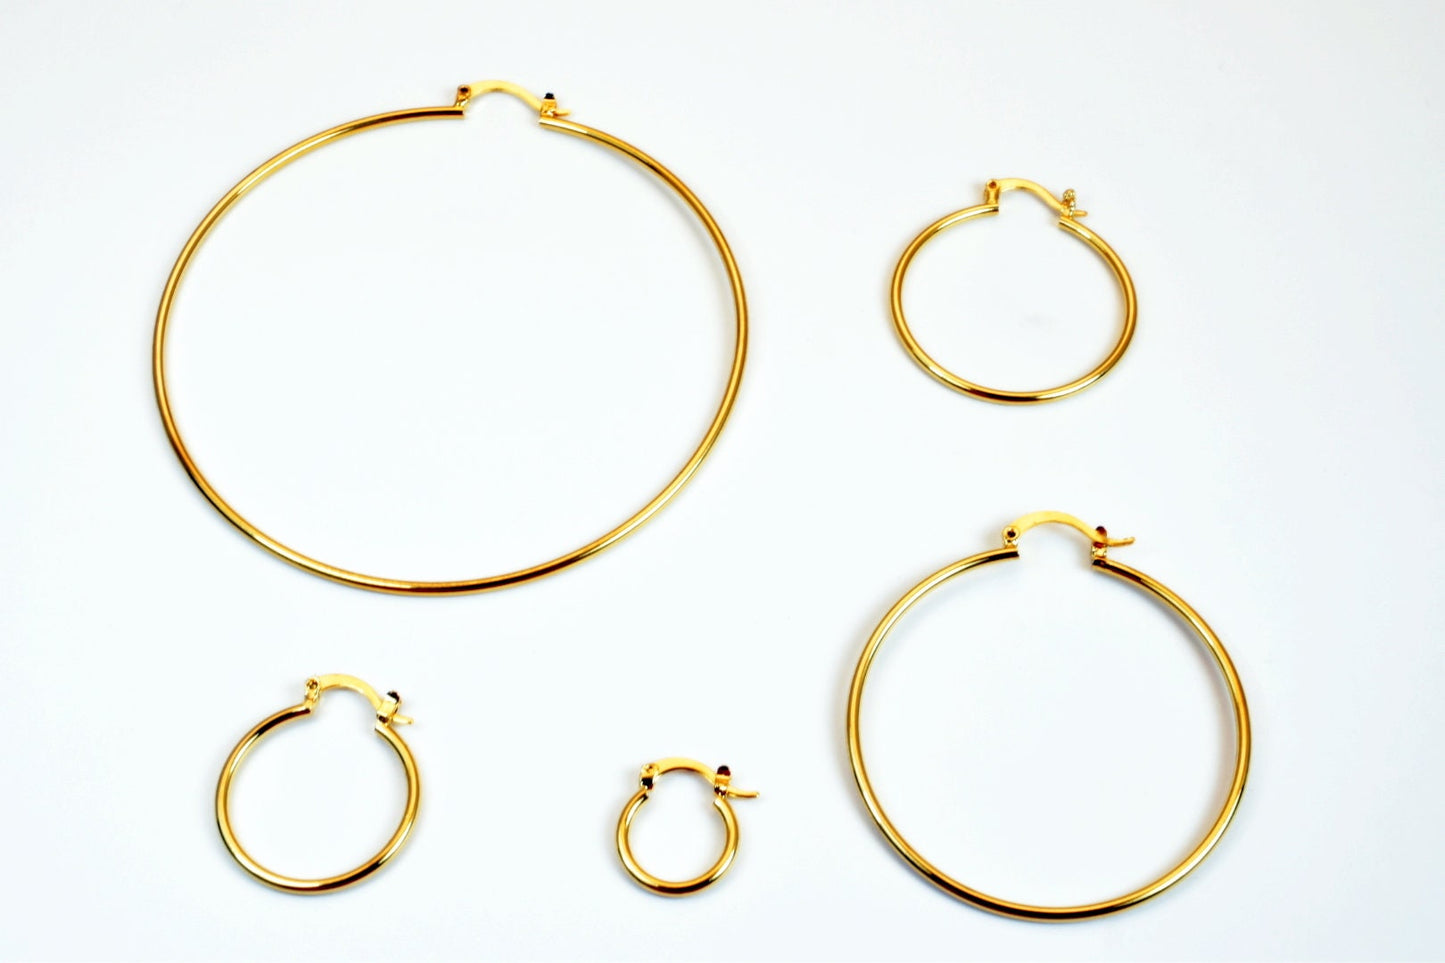 Plain Hoop Earring 18K Gold Filled EP Findings Size 15mm/20mm/25mm/30mm/35mm/40mm/50mm personalize Ladies Girls Jewelry Making 1.5mm thick